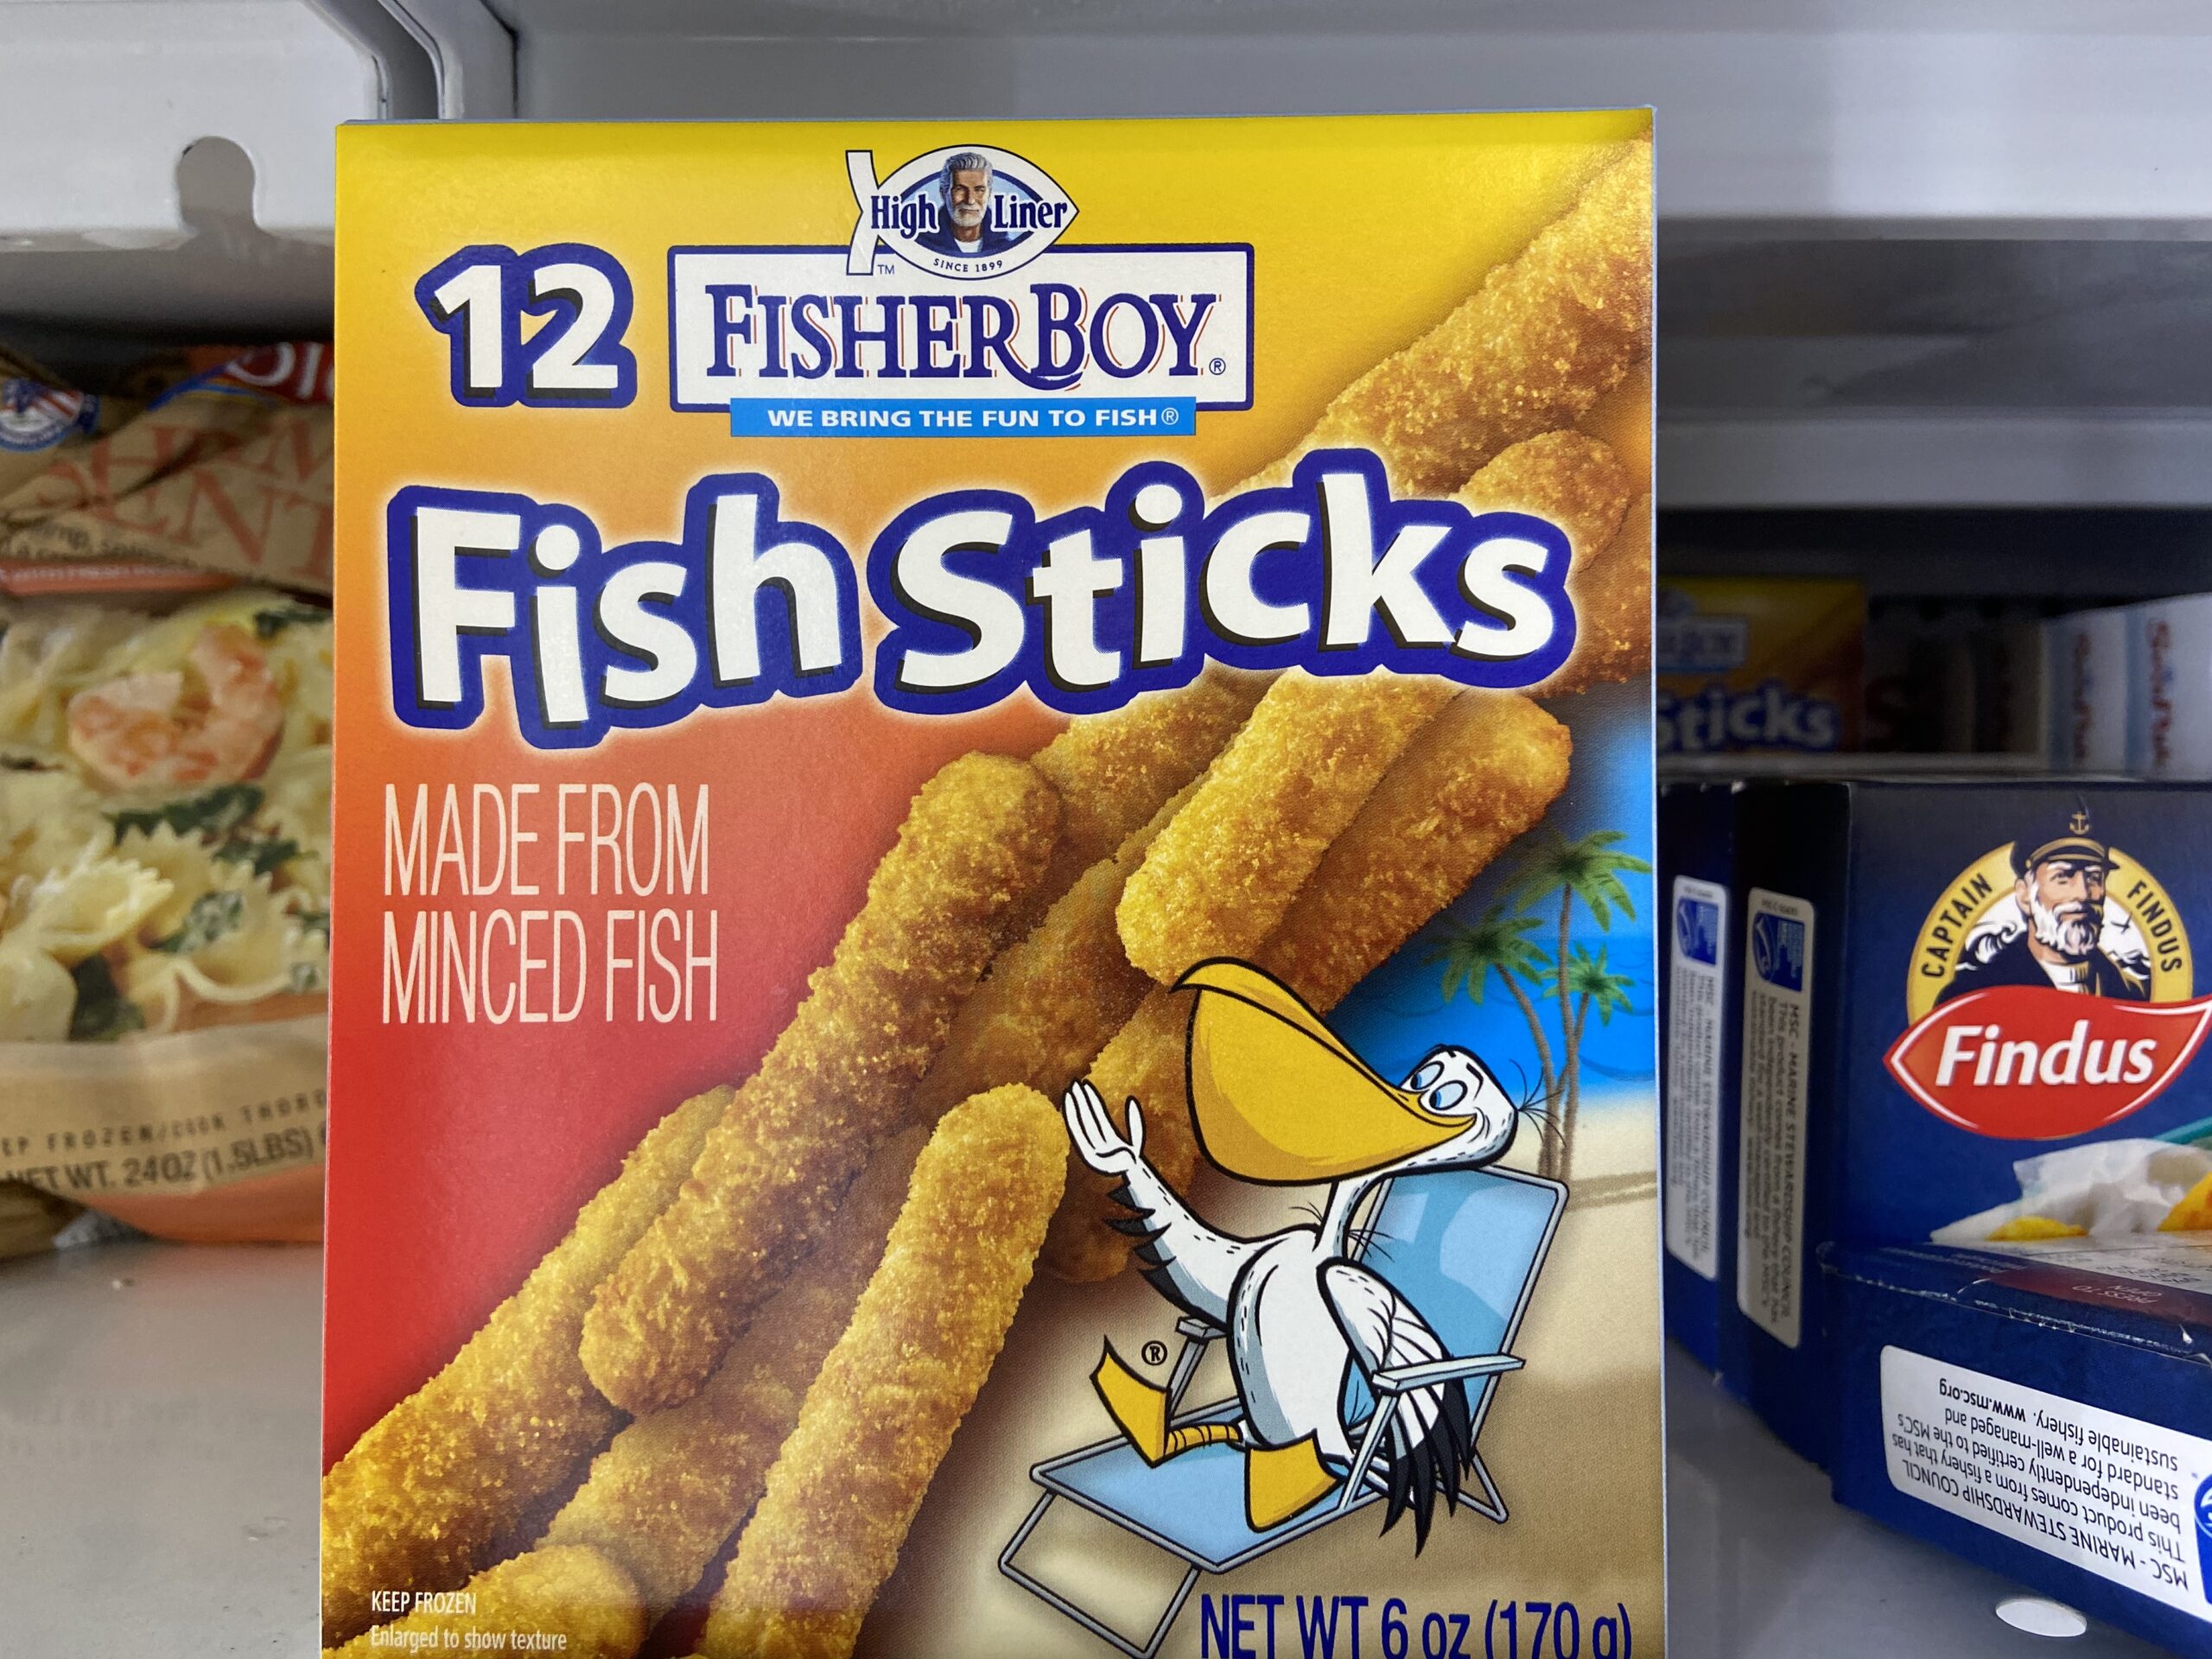 Giant-Deal-on-Fisher-Boy-Fish-Sticks